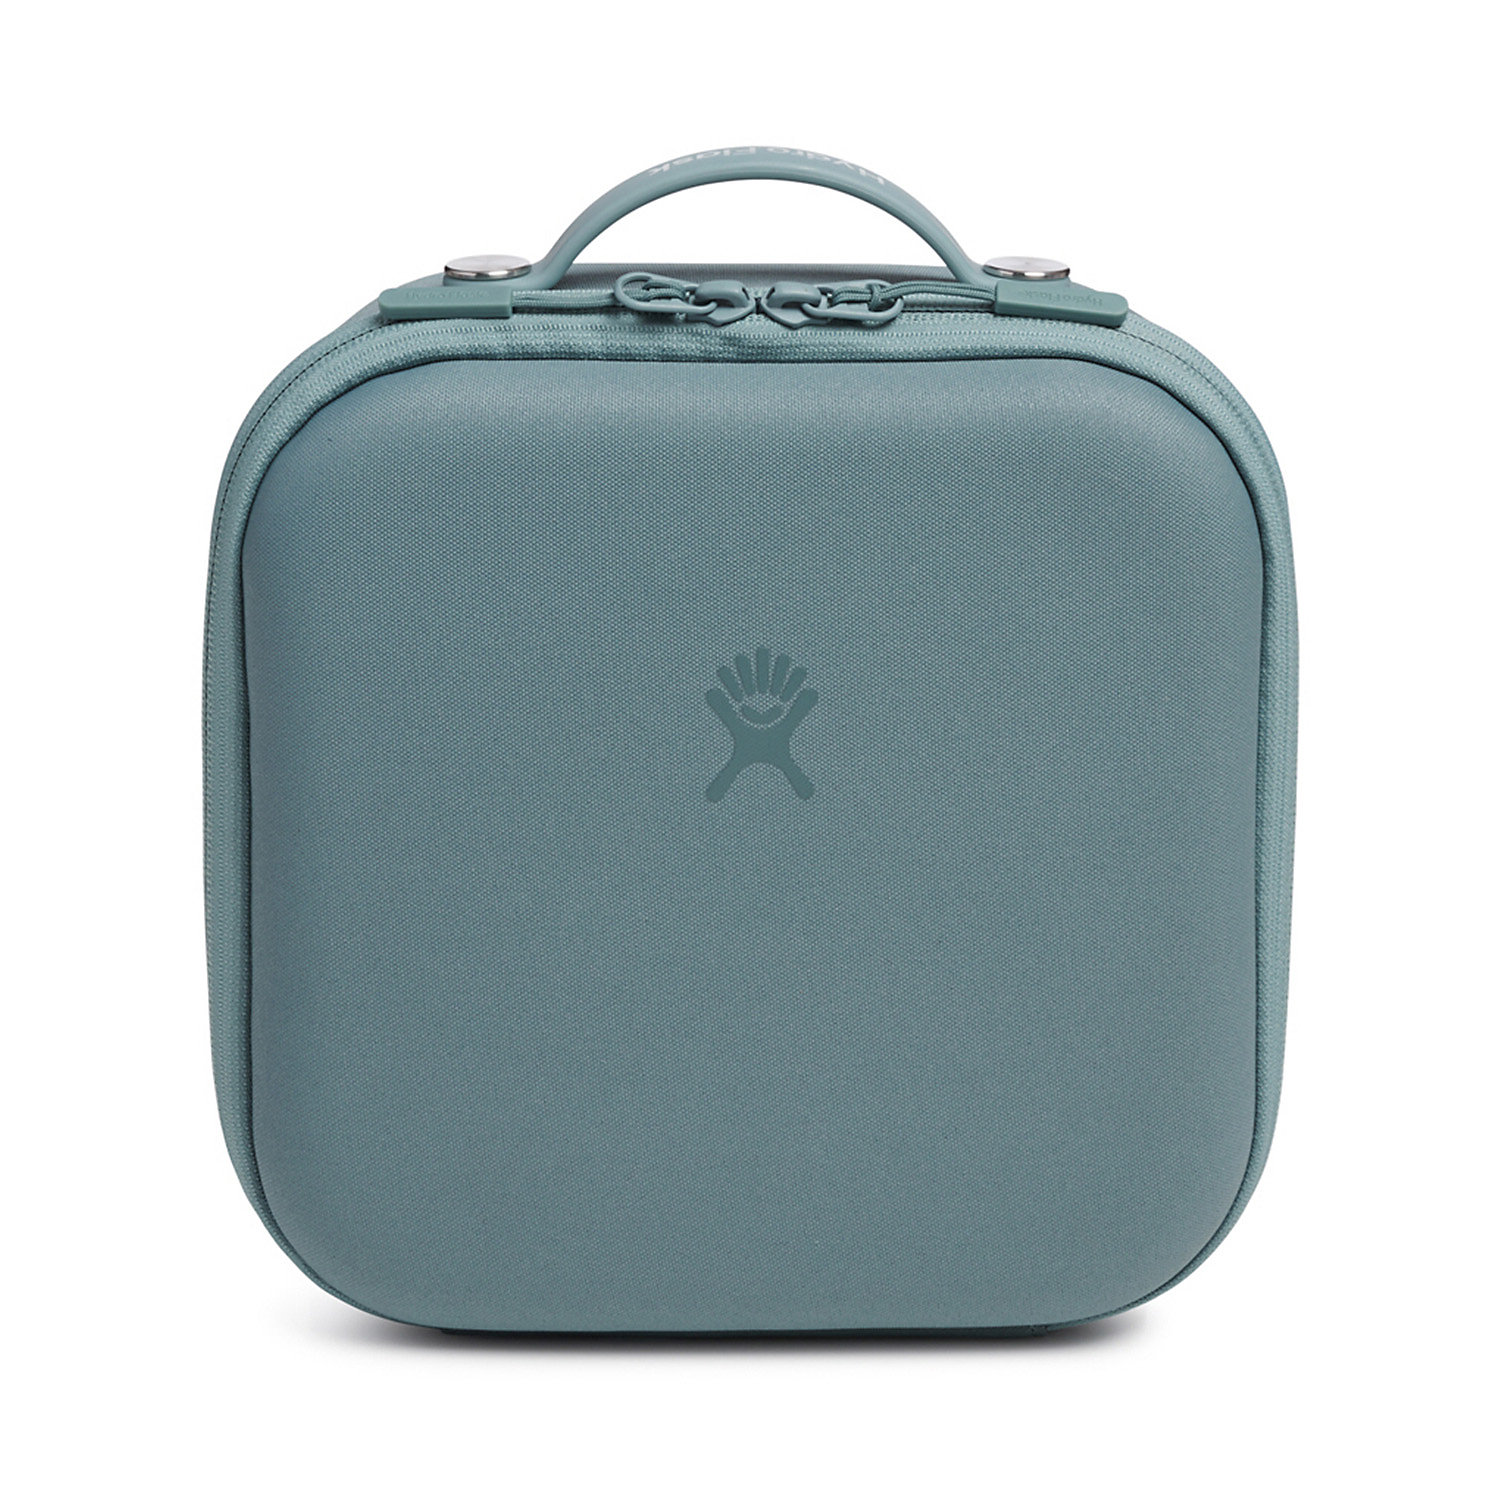 Hydro Flask Insulated Lunch Box